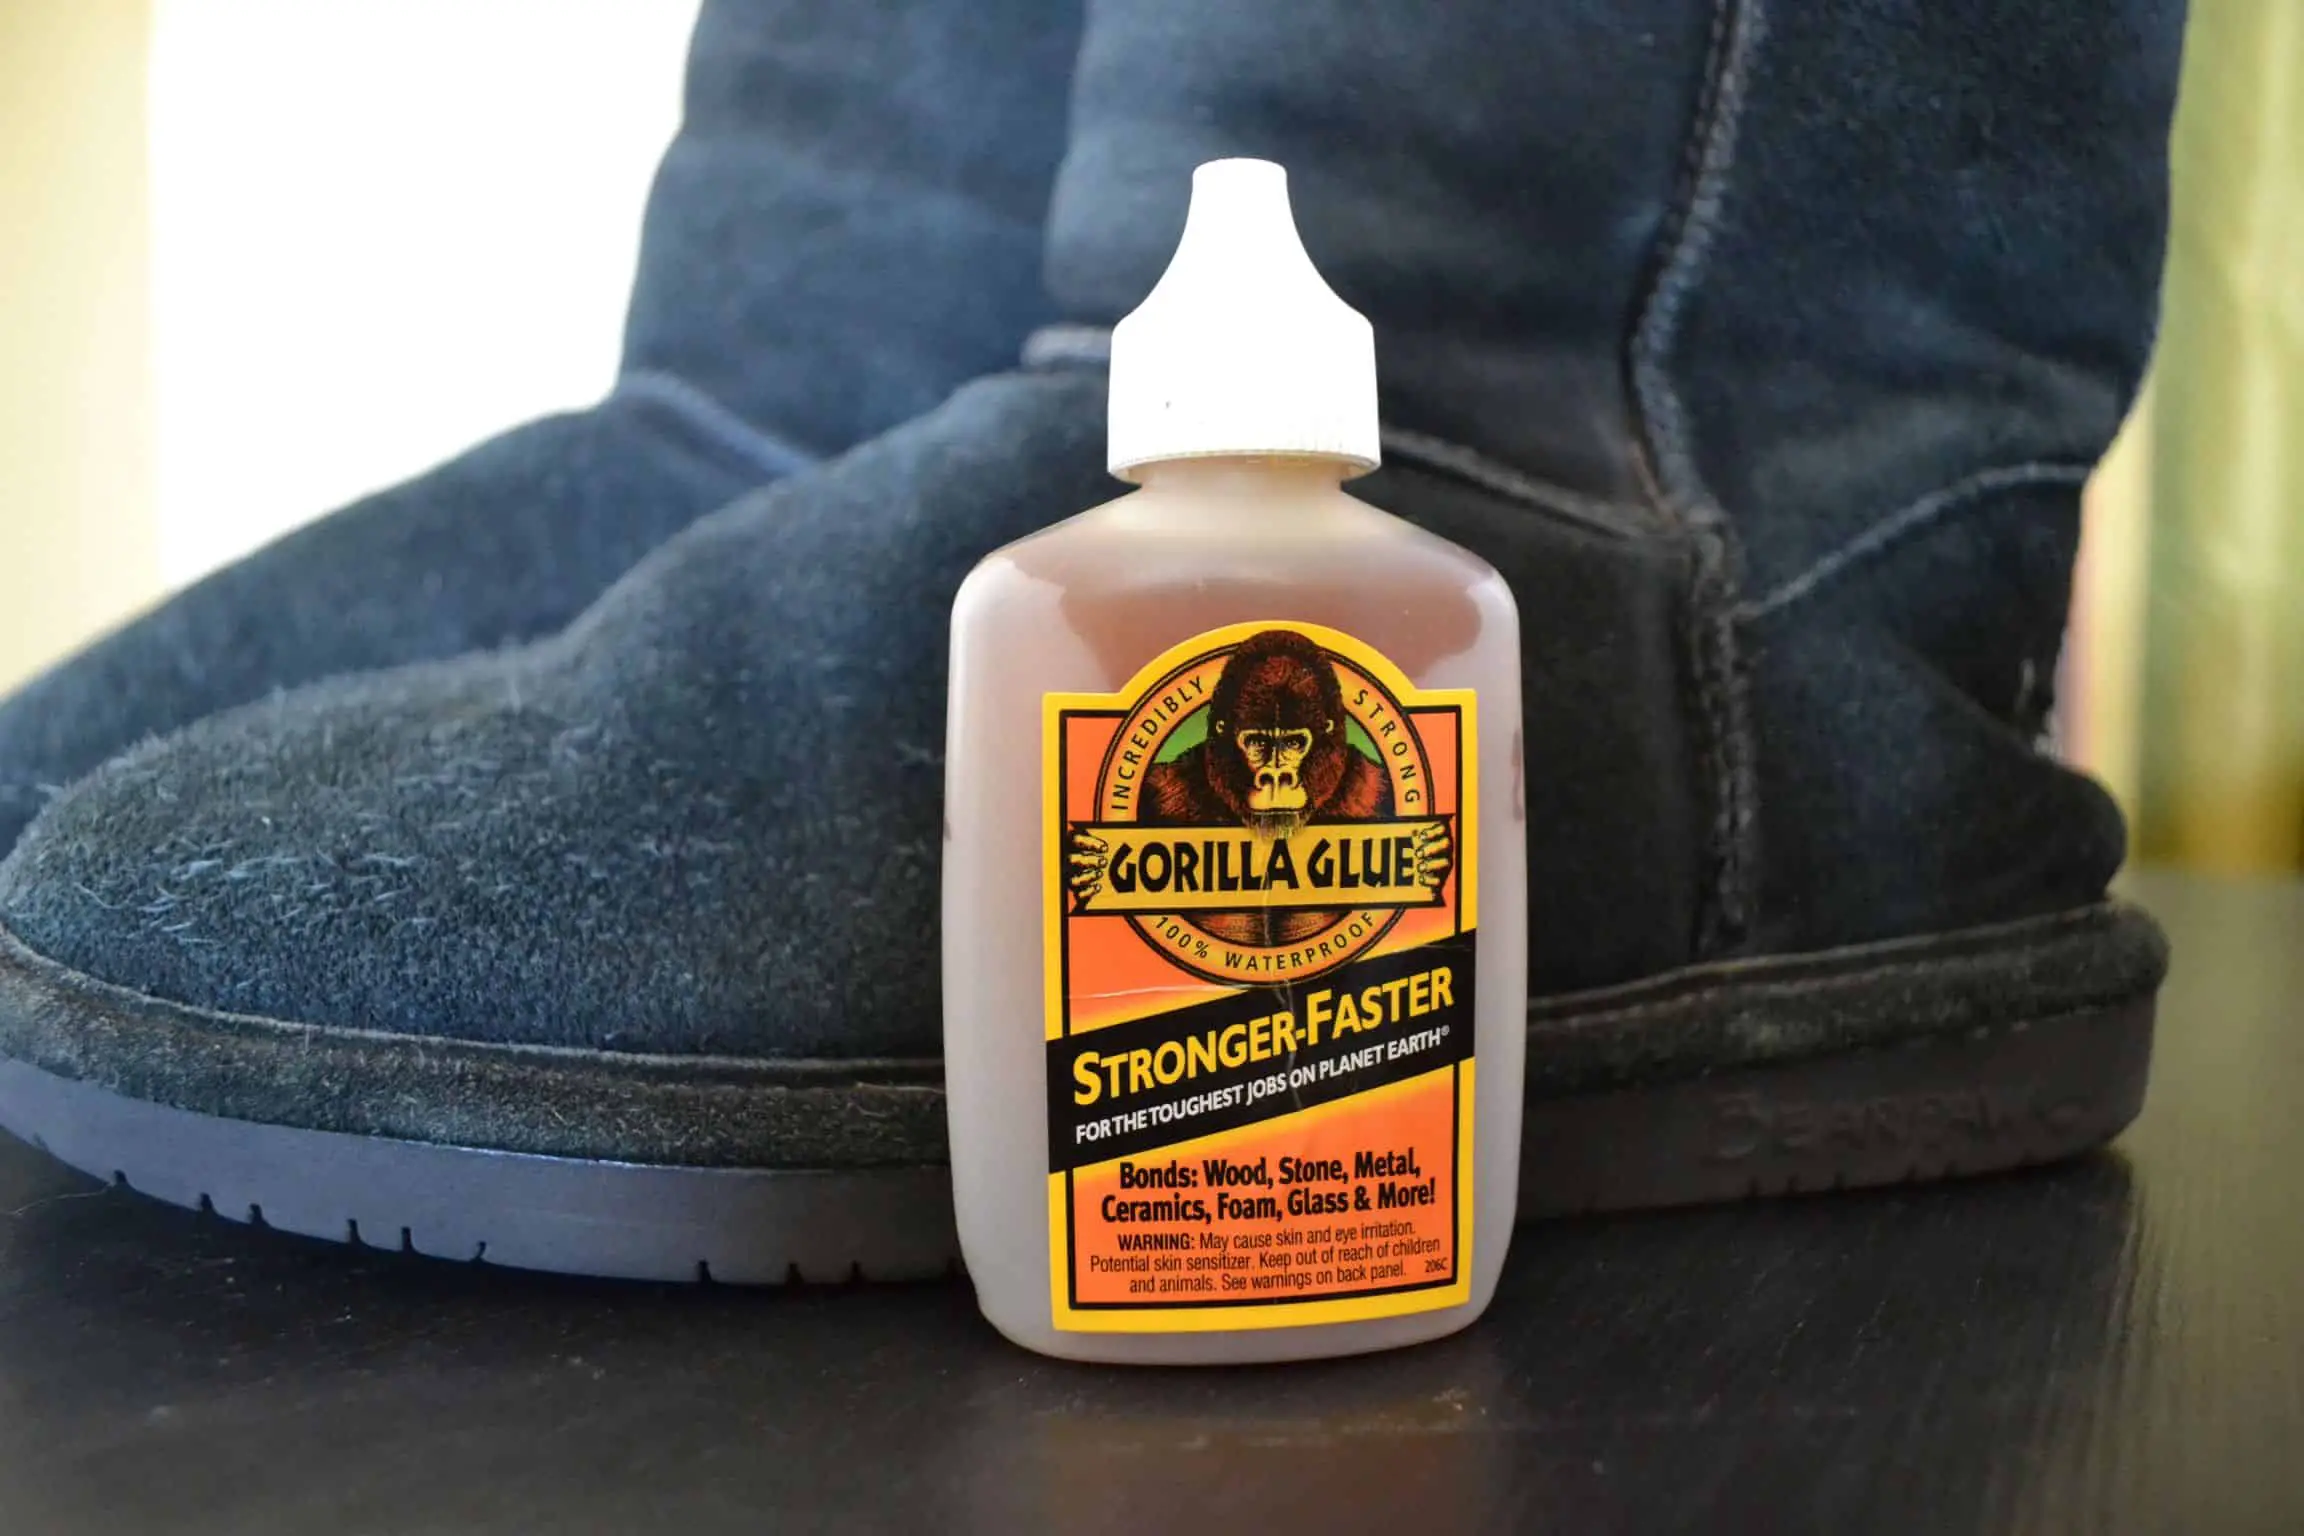 Applying this glue to the damaged parts of rubber boots will also help in making it waterproof